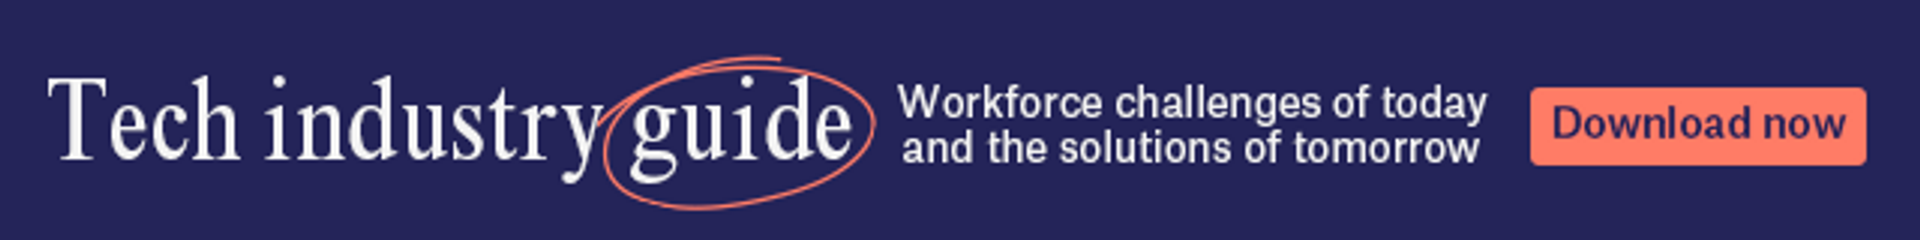 banner promoting a tech industry workforce guide